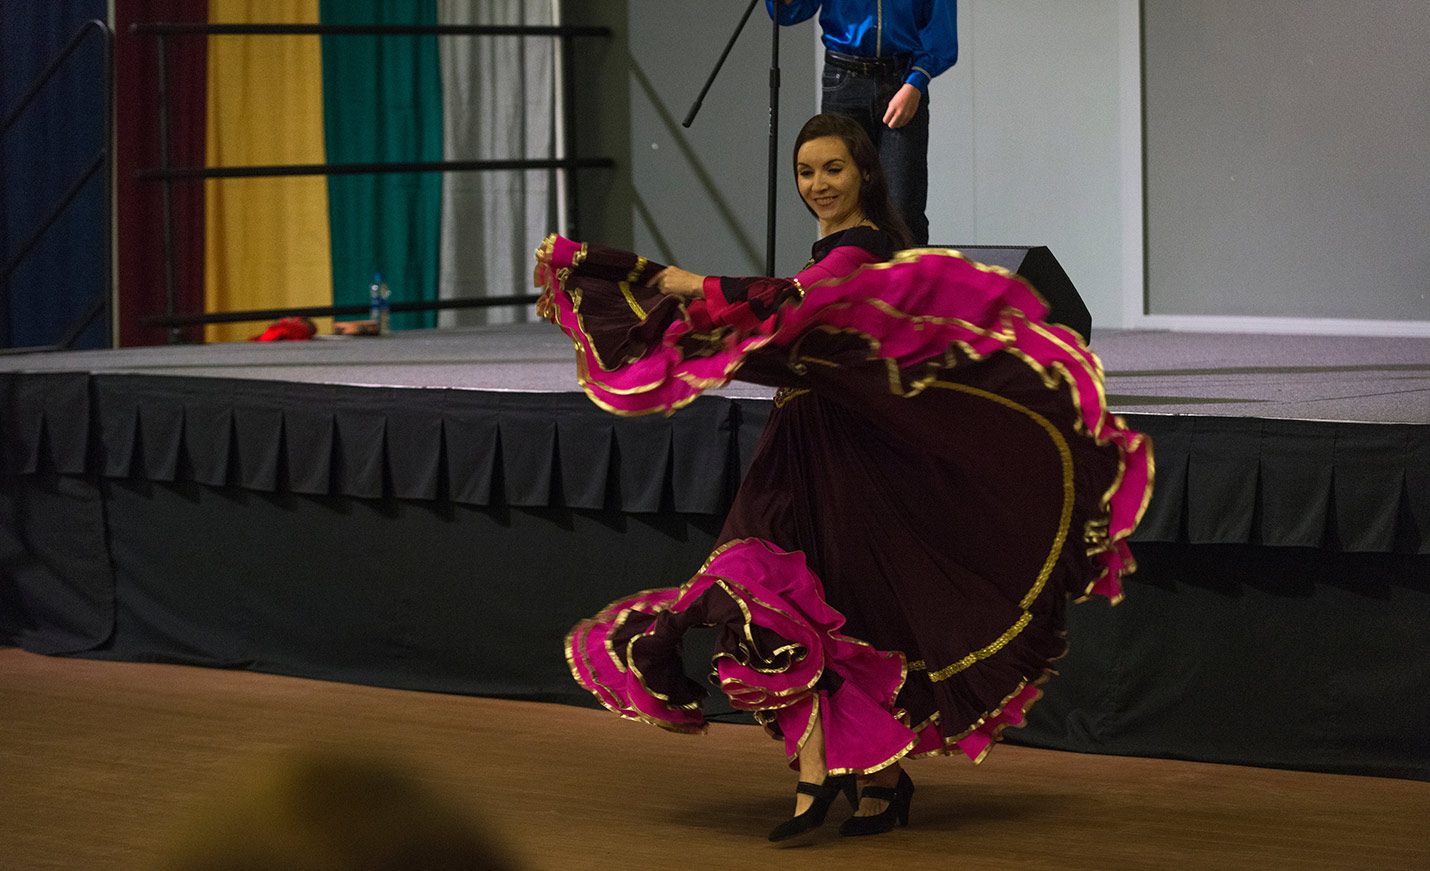 A woman in colorful, billowy magenta, black and yellow dress dances on a stage